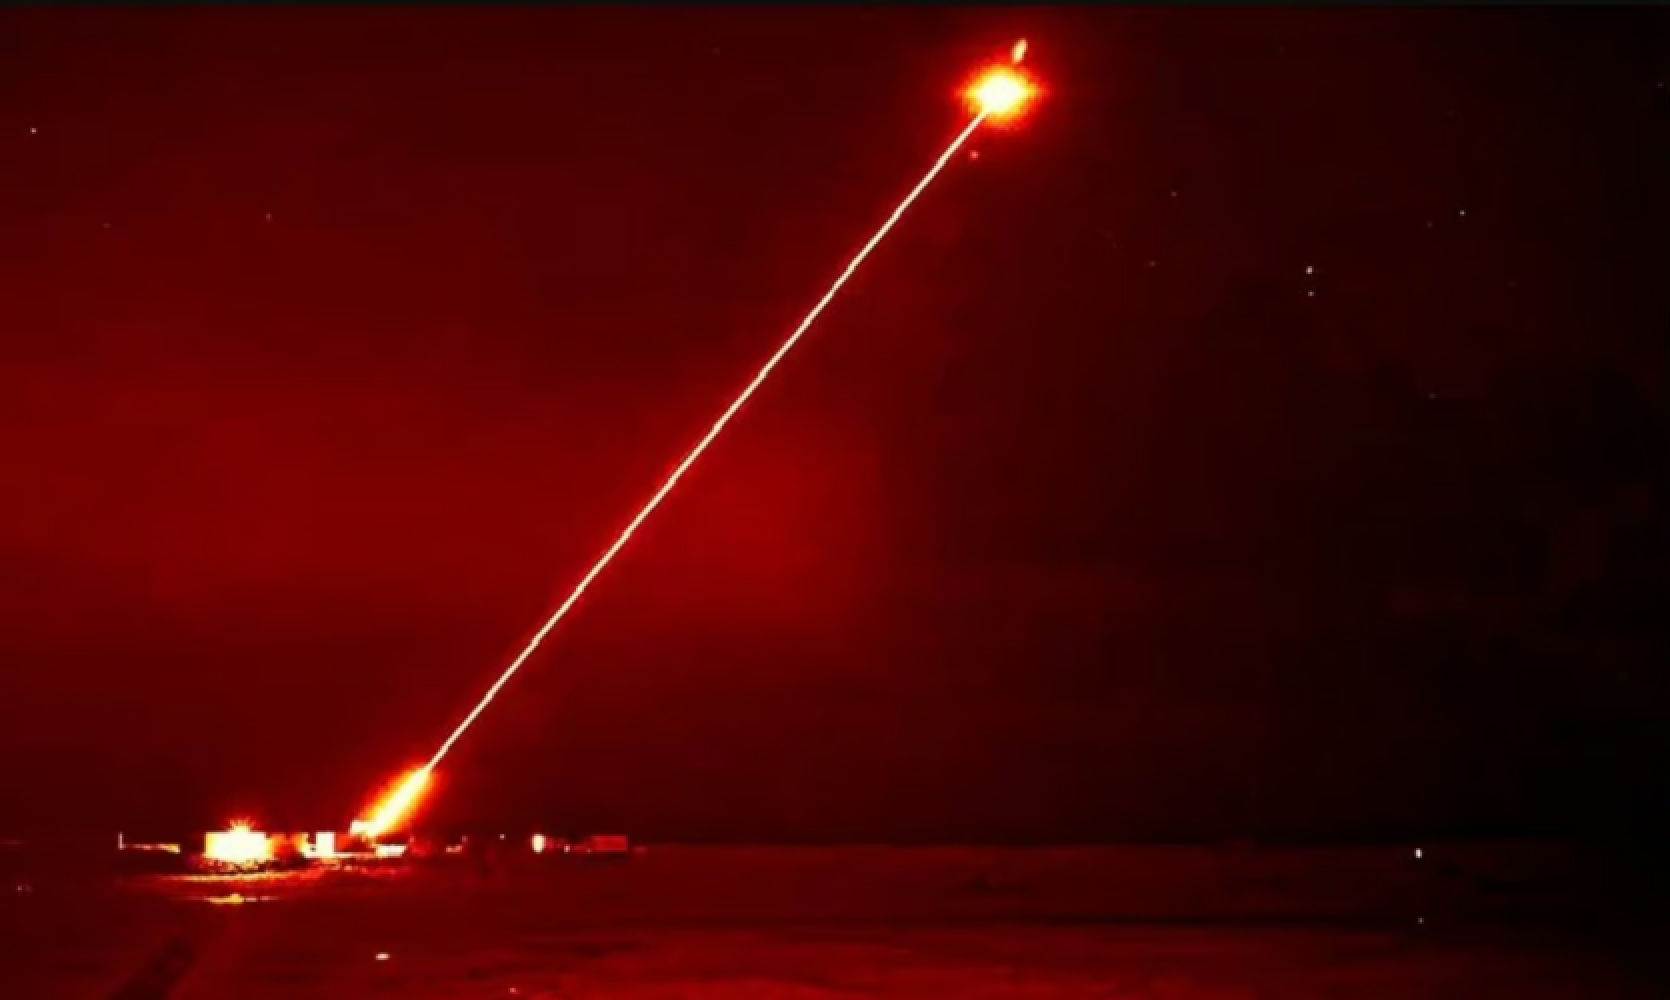 The DragonFire laser (counter-defense) system is shown on video